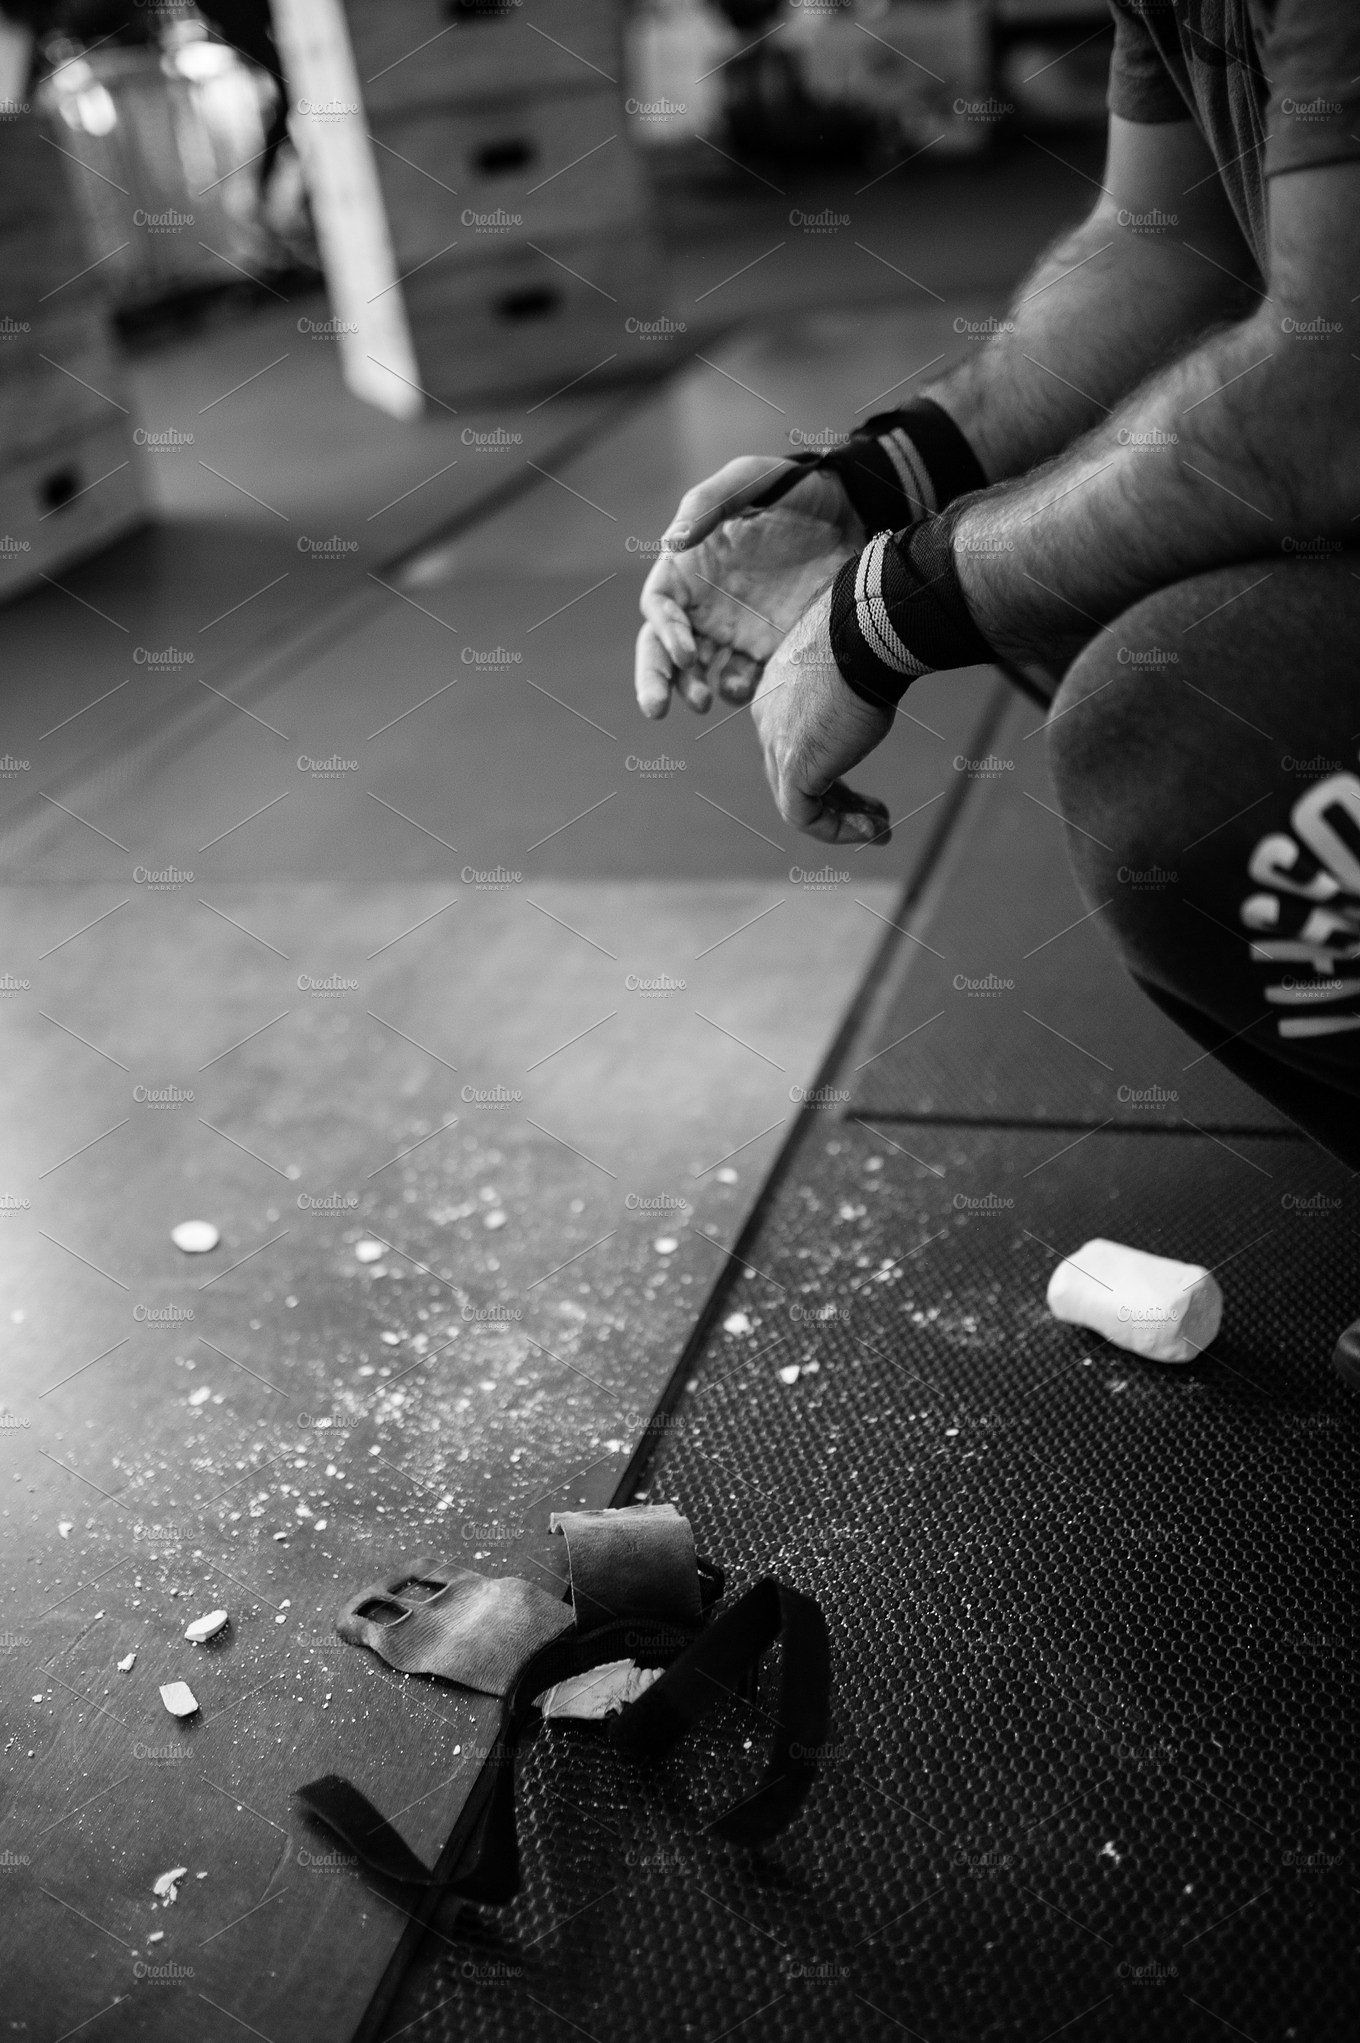 Crossfit Chalk Hands By Sahil Parikh Photography On